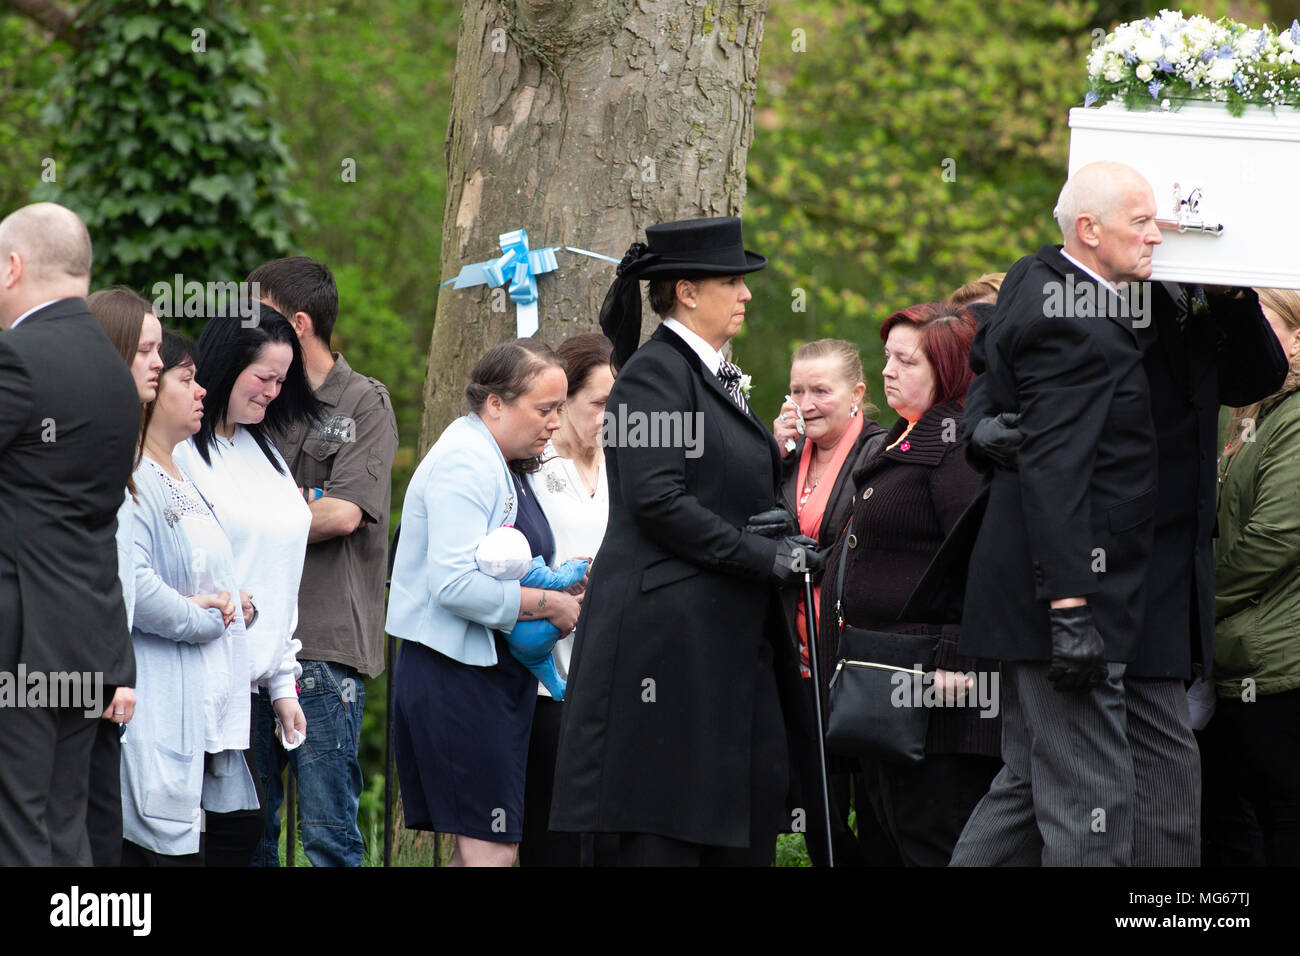 The Funeral of eight years old Mylee Billingham held at St James Parish Church, Brownhills, Walsall, UK. Stock Photo